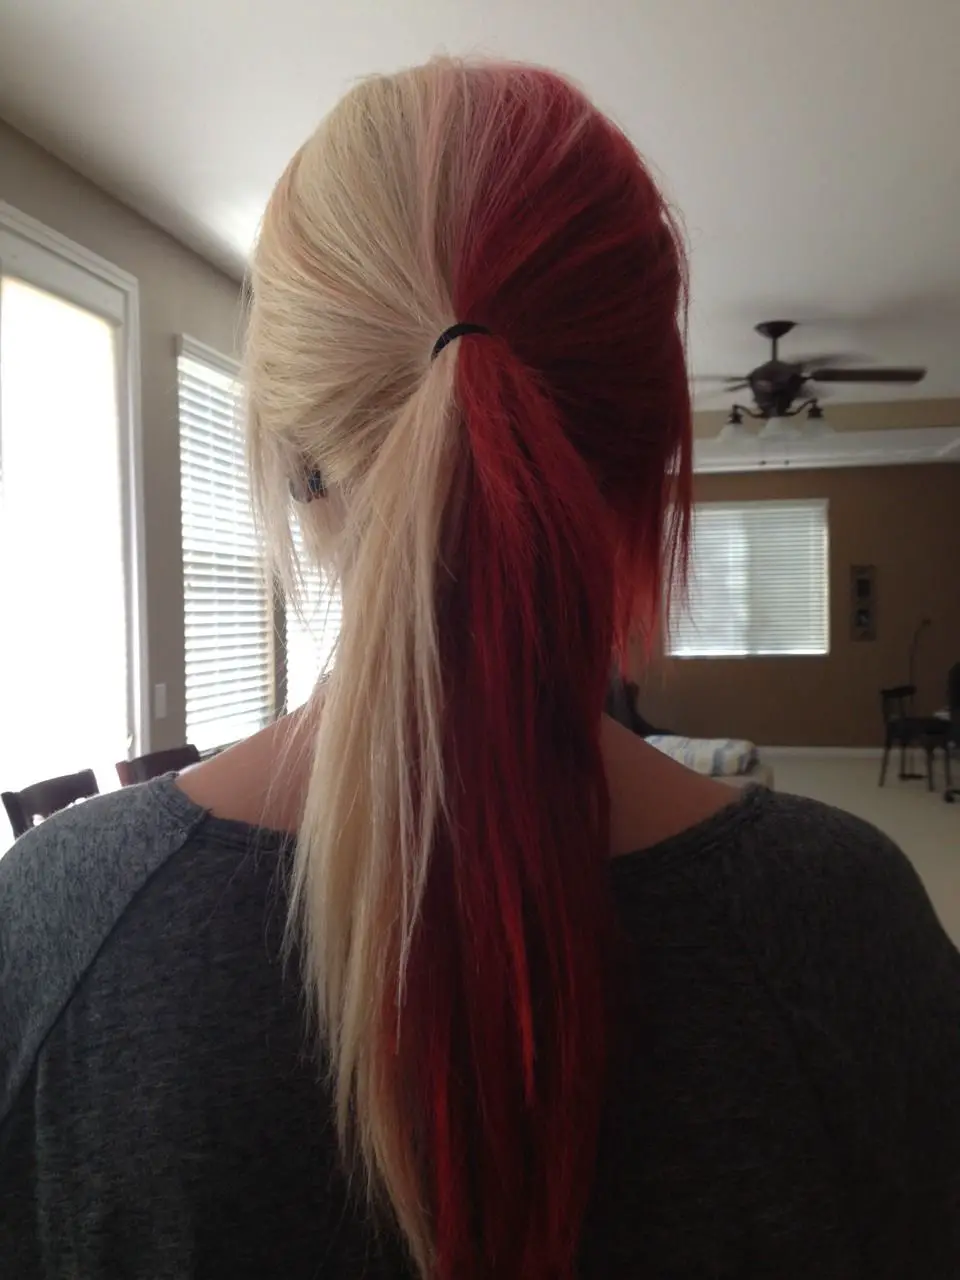 33-unique-split-hair-dye-ideas-trending-color-combinations-to-try-in-2023 Blonde & Red Split Hair